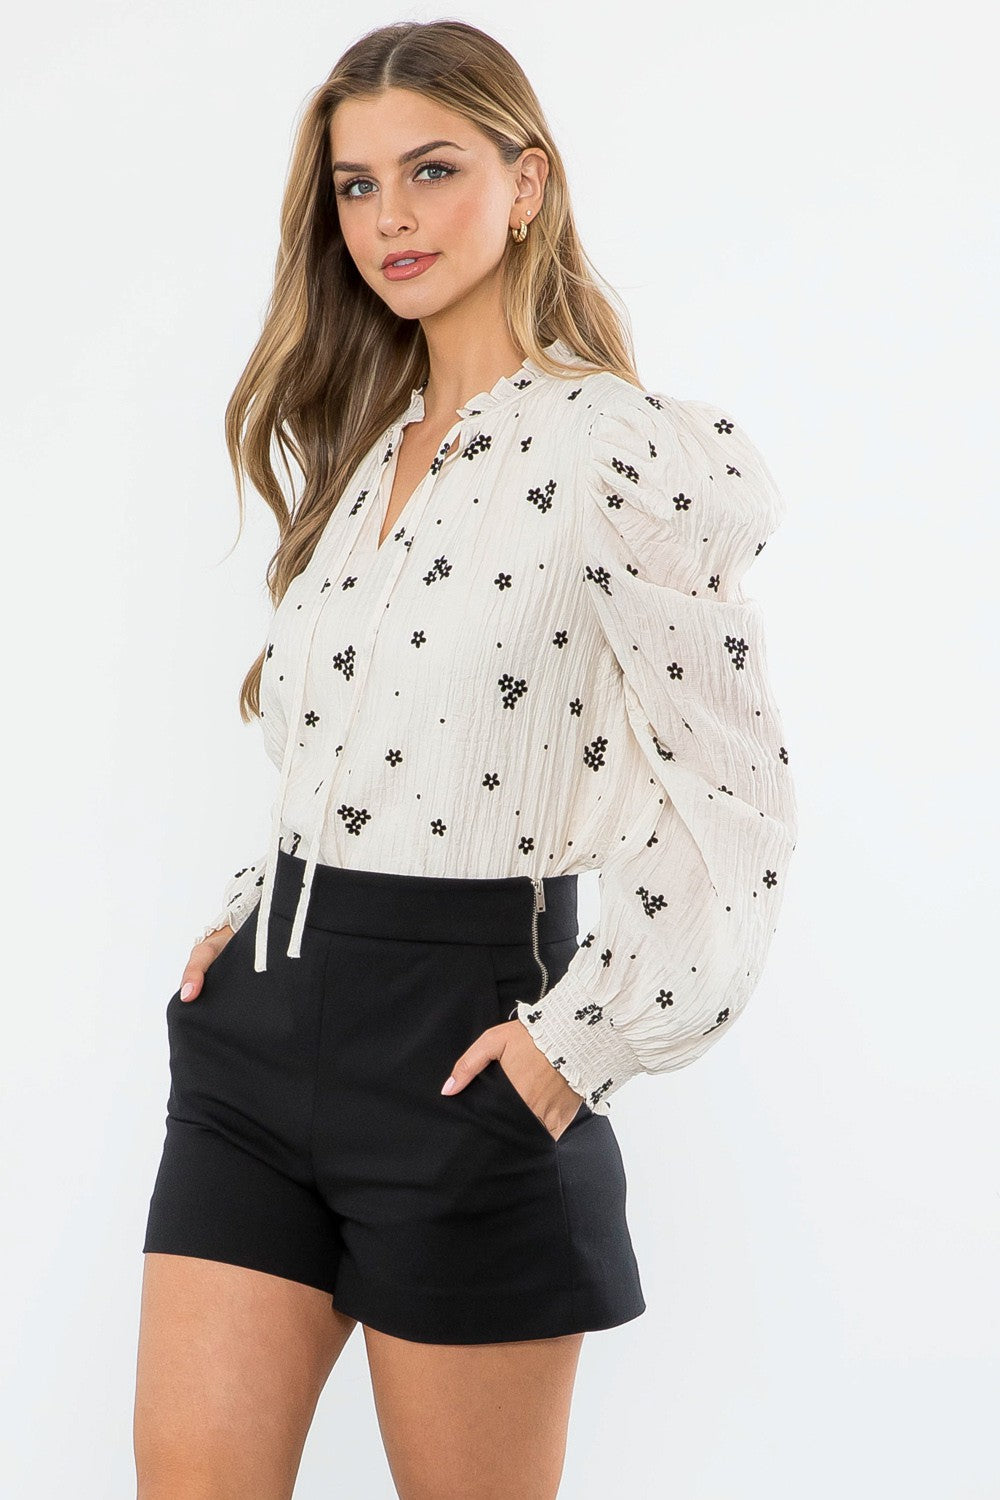 Ivory And Black Floral Print Long Sleeve Blouse, REBELRY BOUTIQUE, Arvada, CO